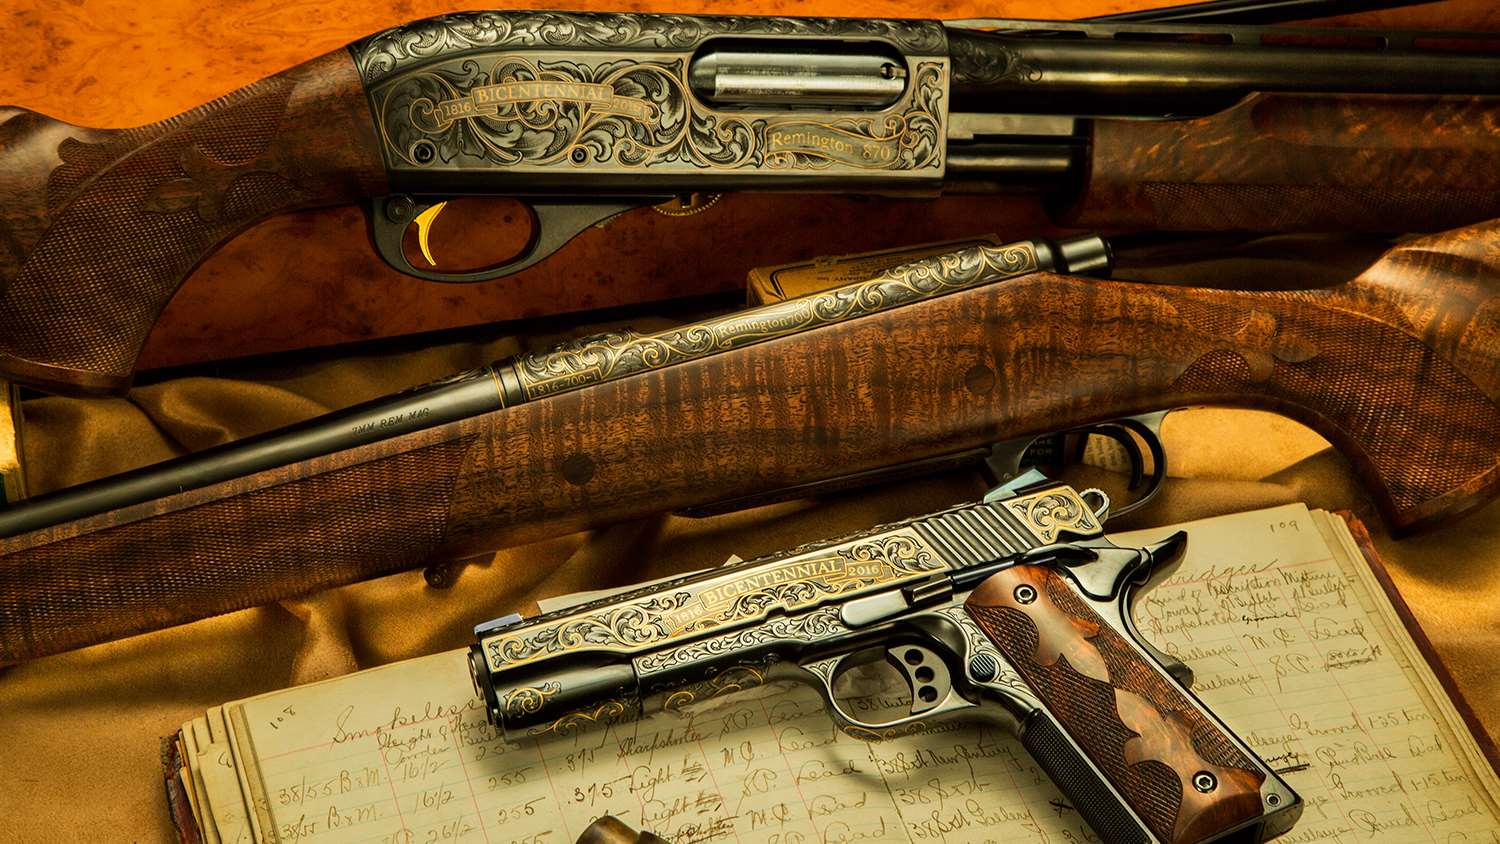 Remington 200th Anniversary Limited Edition Guns Support NRA